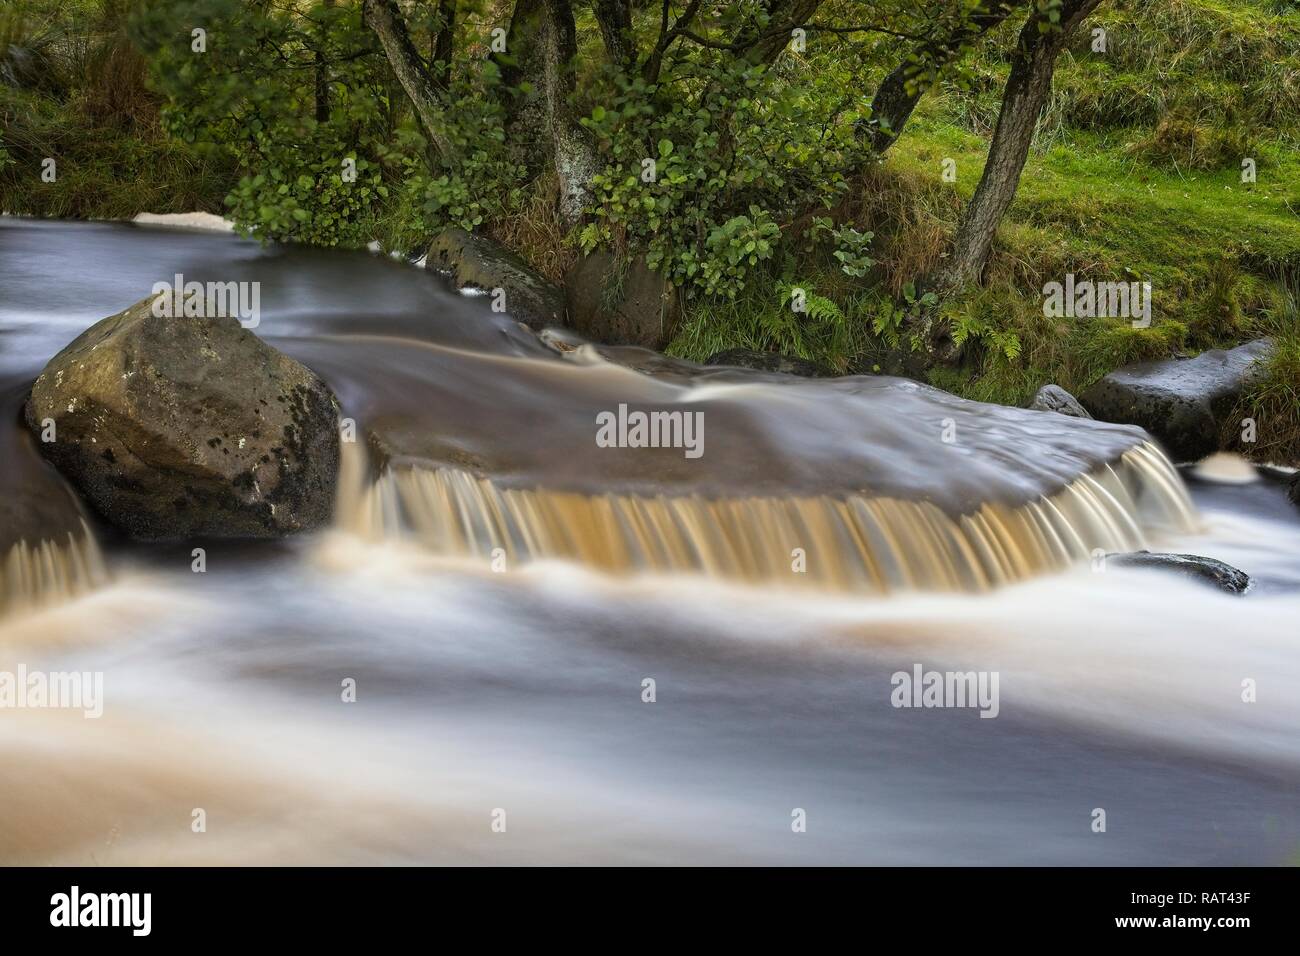 A fast-flowing river in the Peak District National Park, UK. The erosive force of Burbage Brook through Padley Gorge is seen in its turbulent flow. Stock Photo